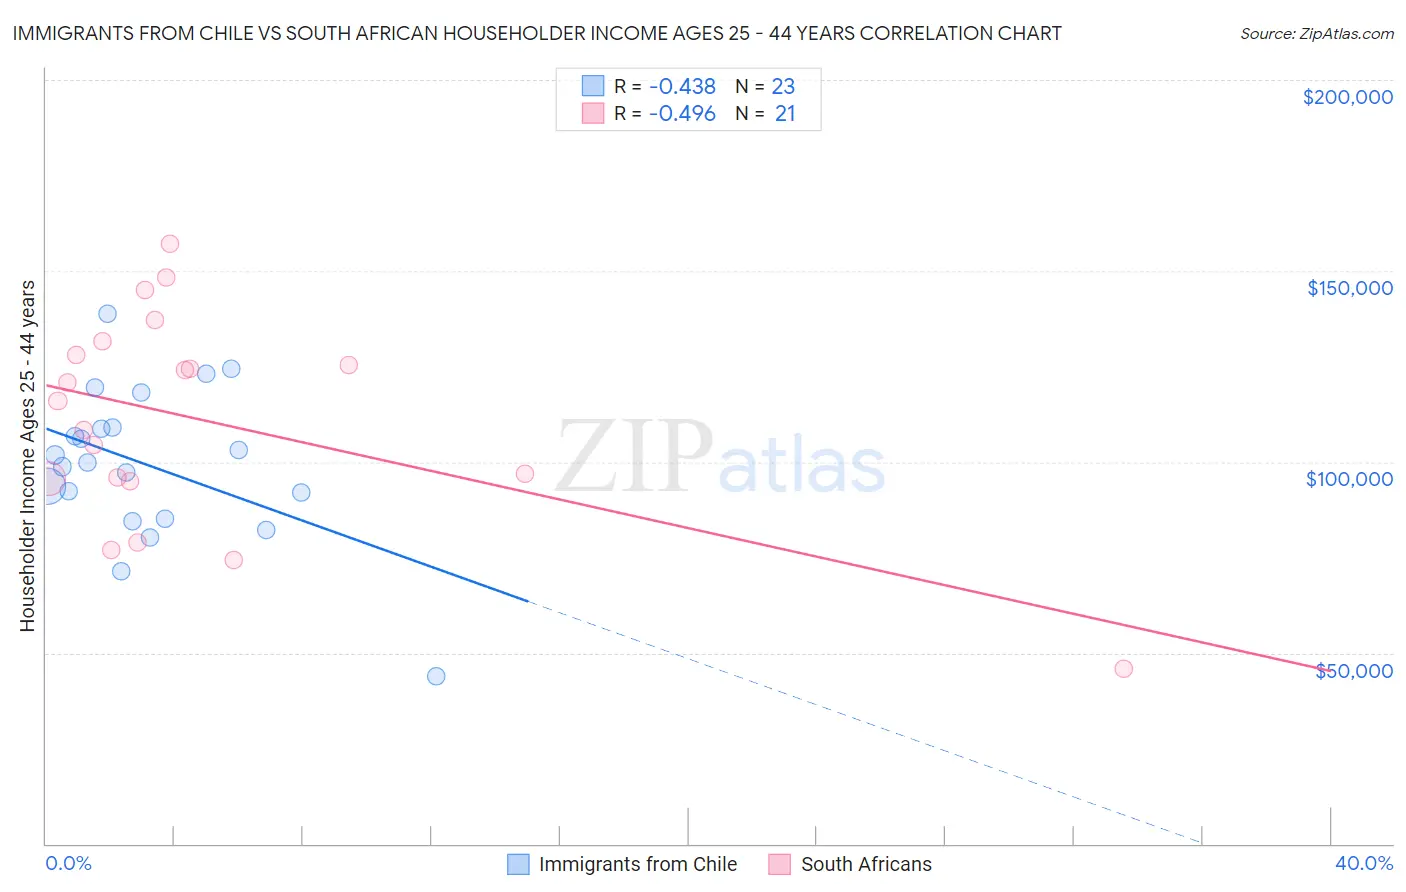 Immigrants from Chile vs South African Householder Income Ages 25 - 44 years